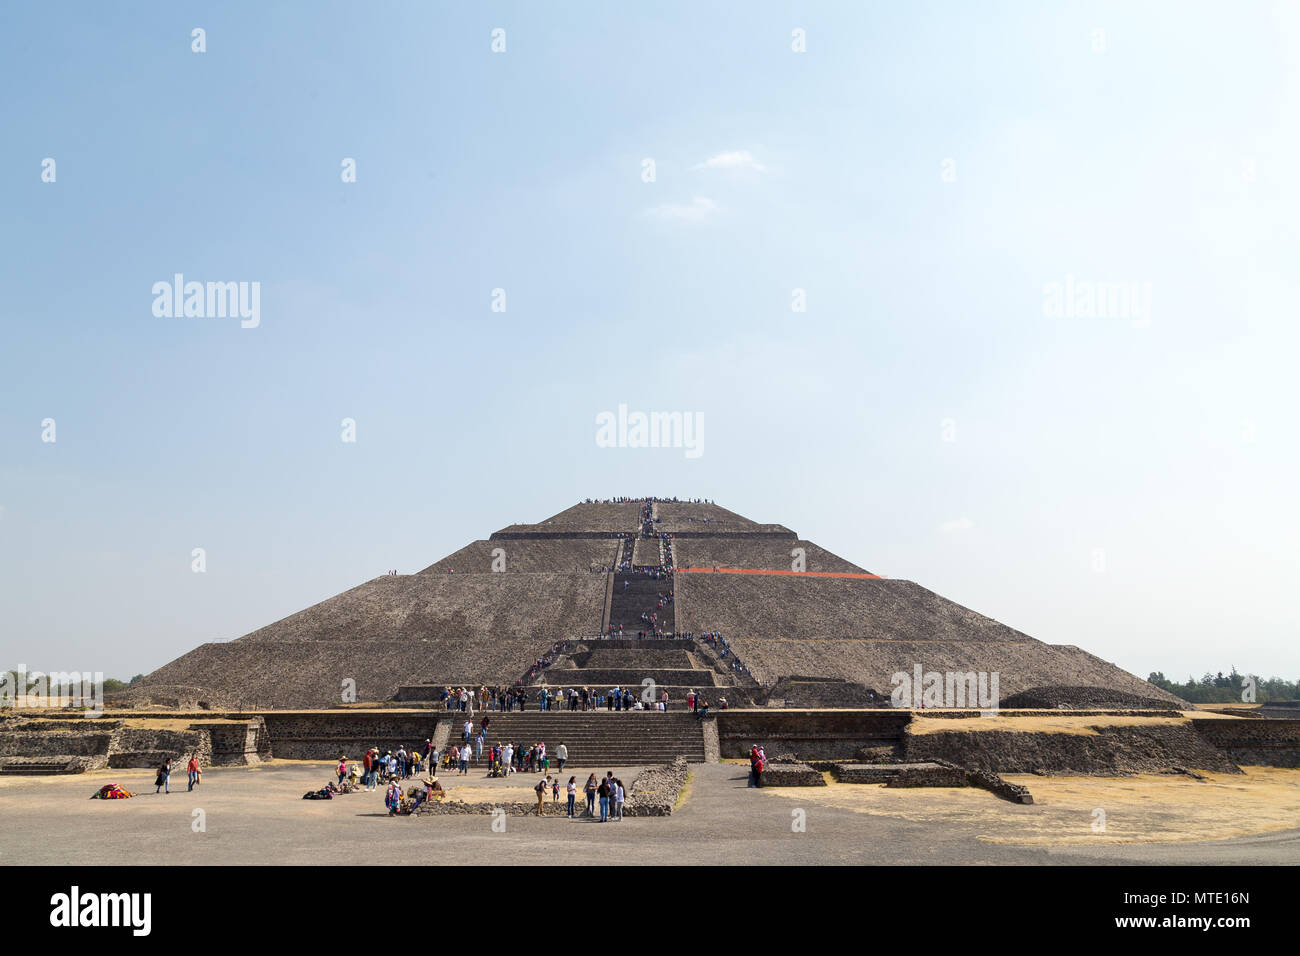 Teotihuacan, Pyramid of the Sun. Prehispanic archaeological site in Mexico Stock Photo